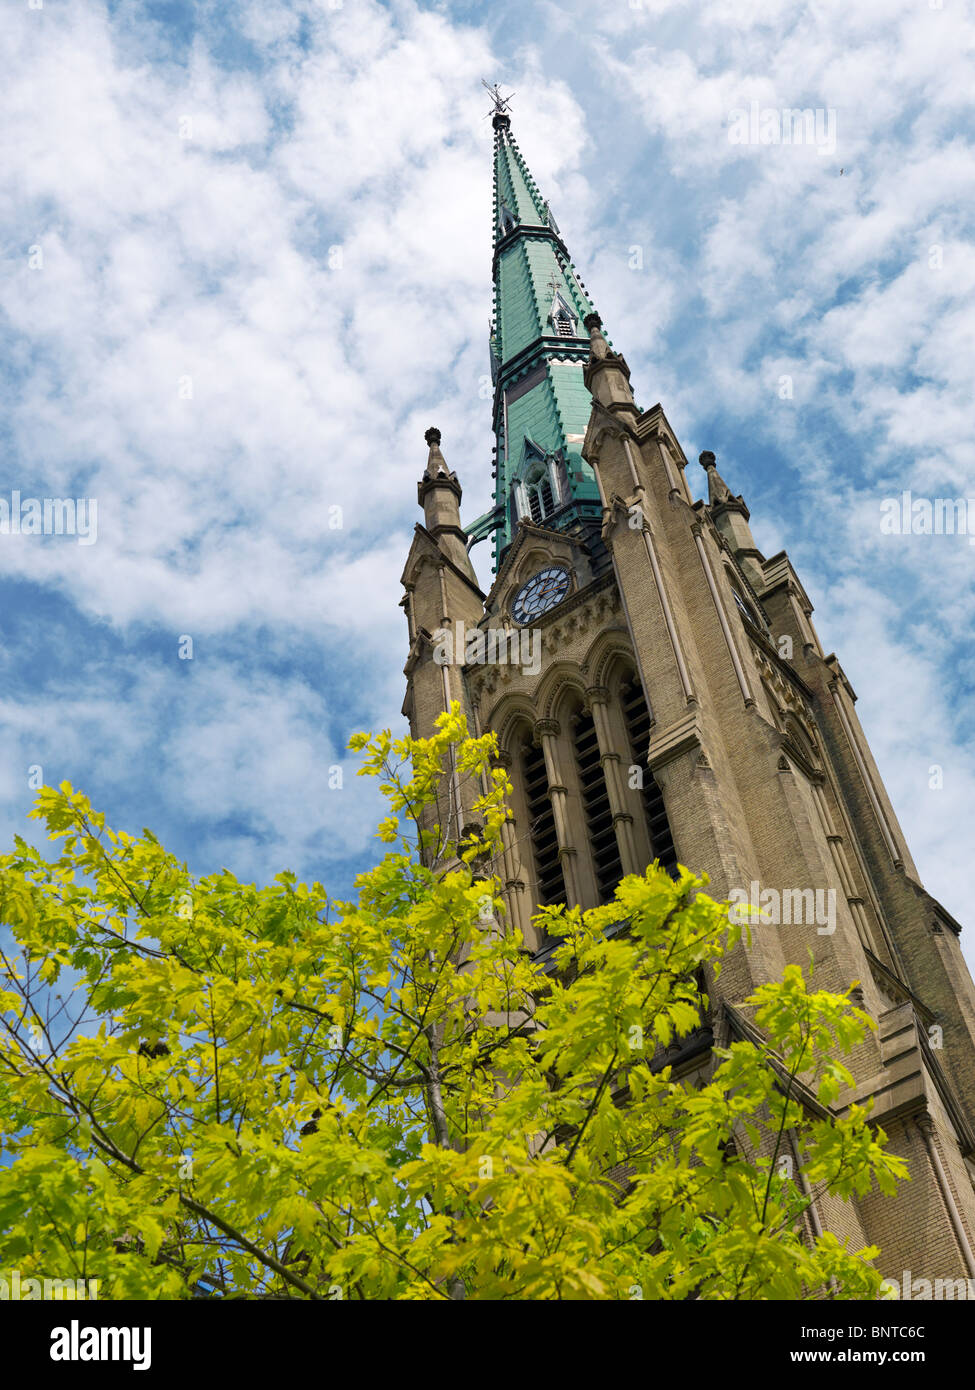 The Cathedral Church of St. James. Gothic Revival architecture, Anglican church in Toronto, Ontario, Canada. Stock Photo